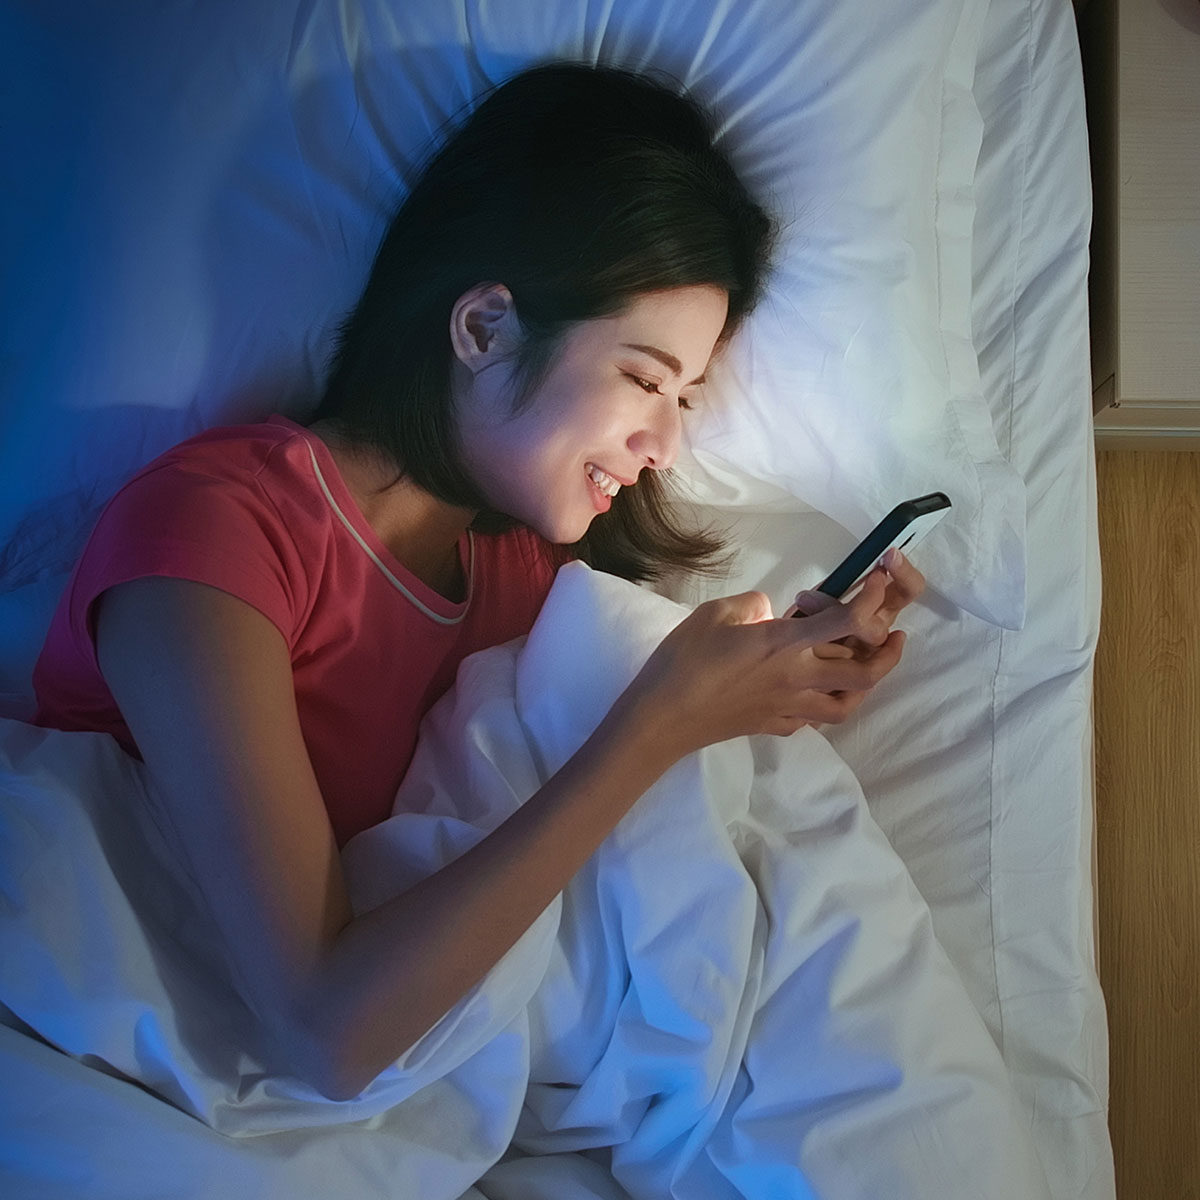 How to Use the iPhone Blue Light Filter and Get Better Sleep